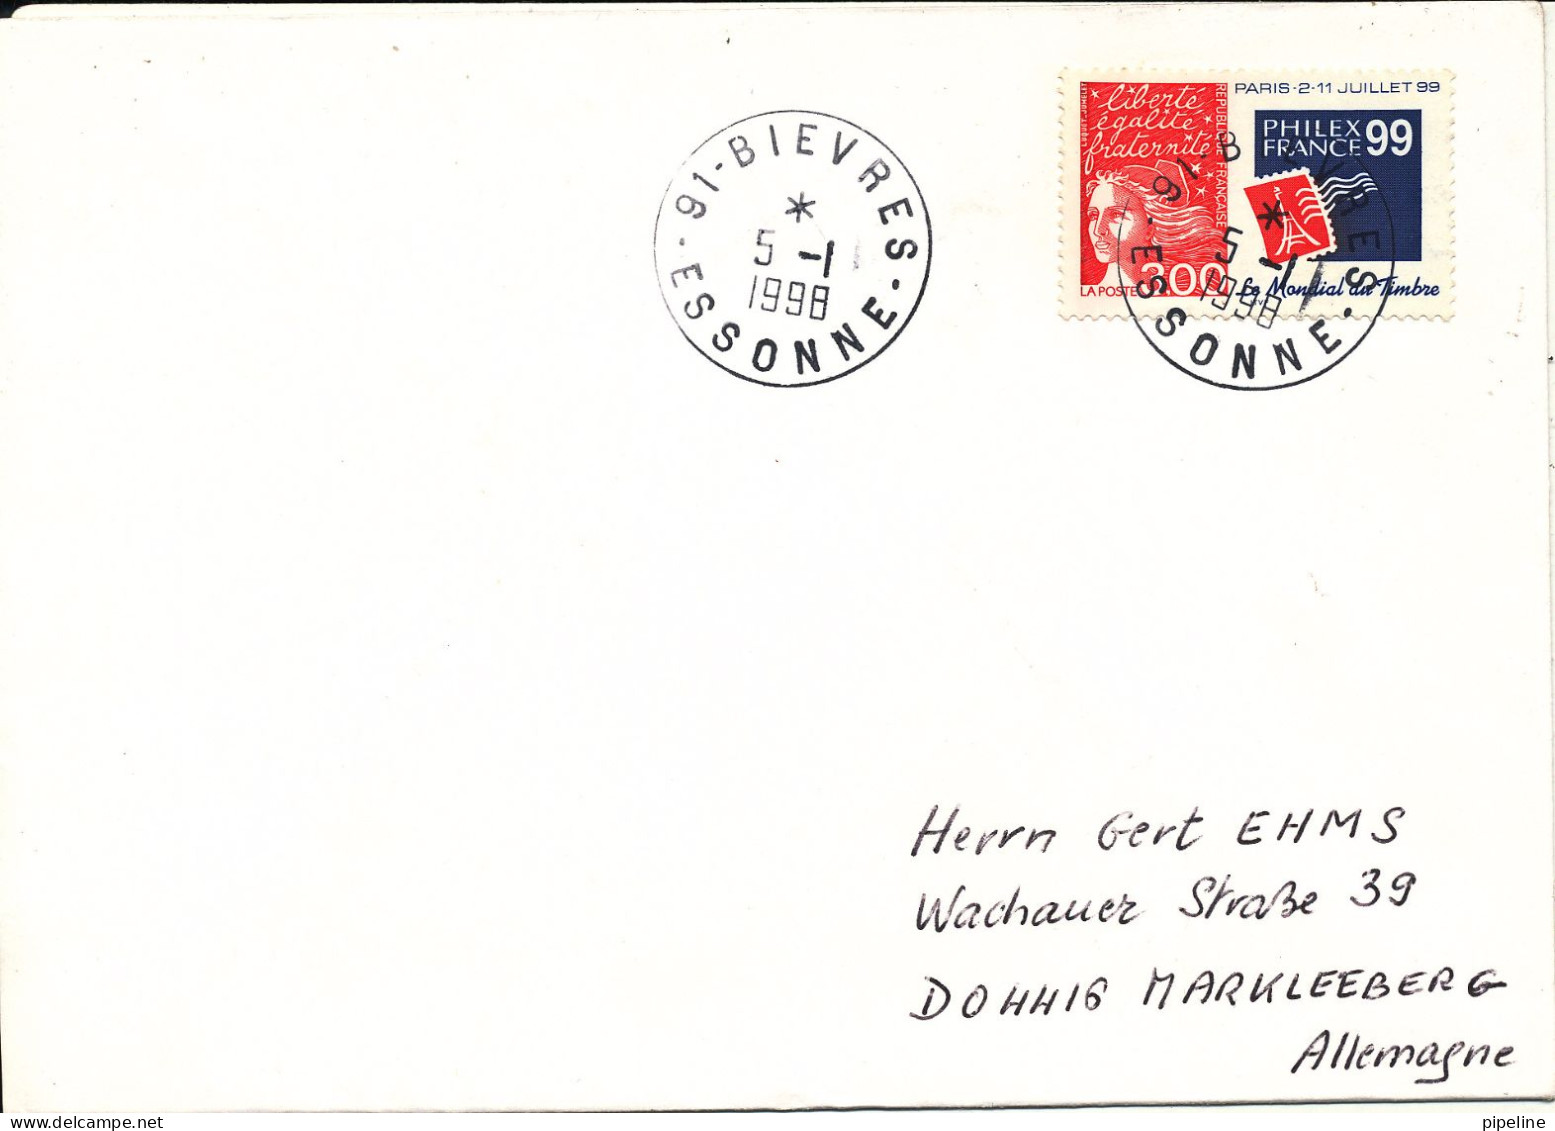 France Cover Sent To Germany Bievres Essonne 5-1-1998 Single Franked Philex France 99 - Covers & Documents